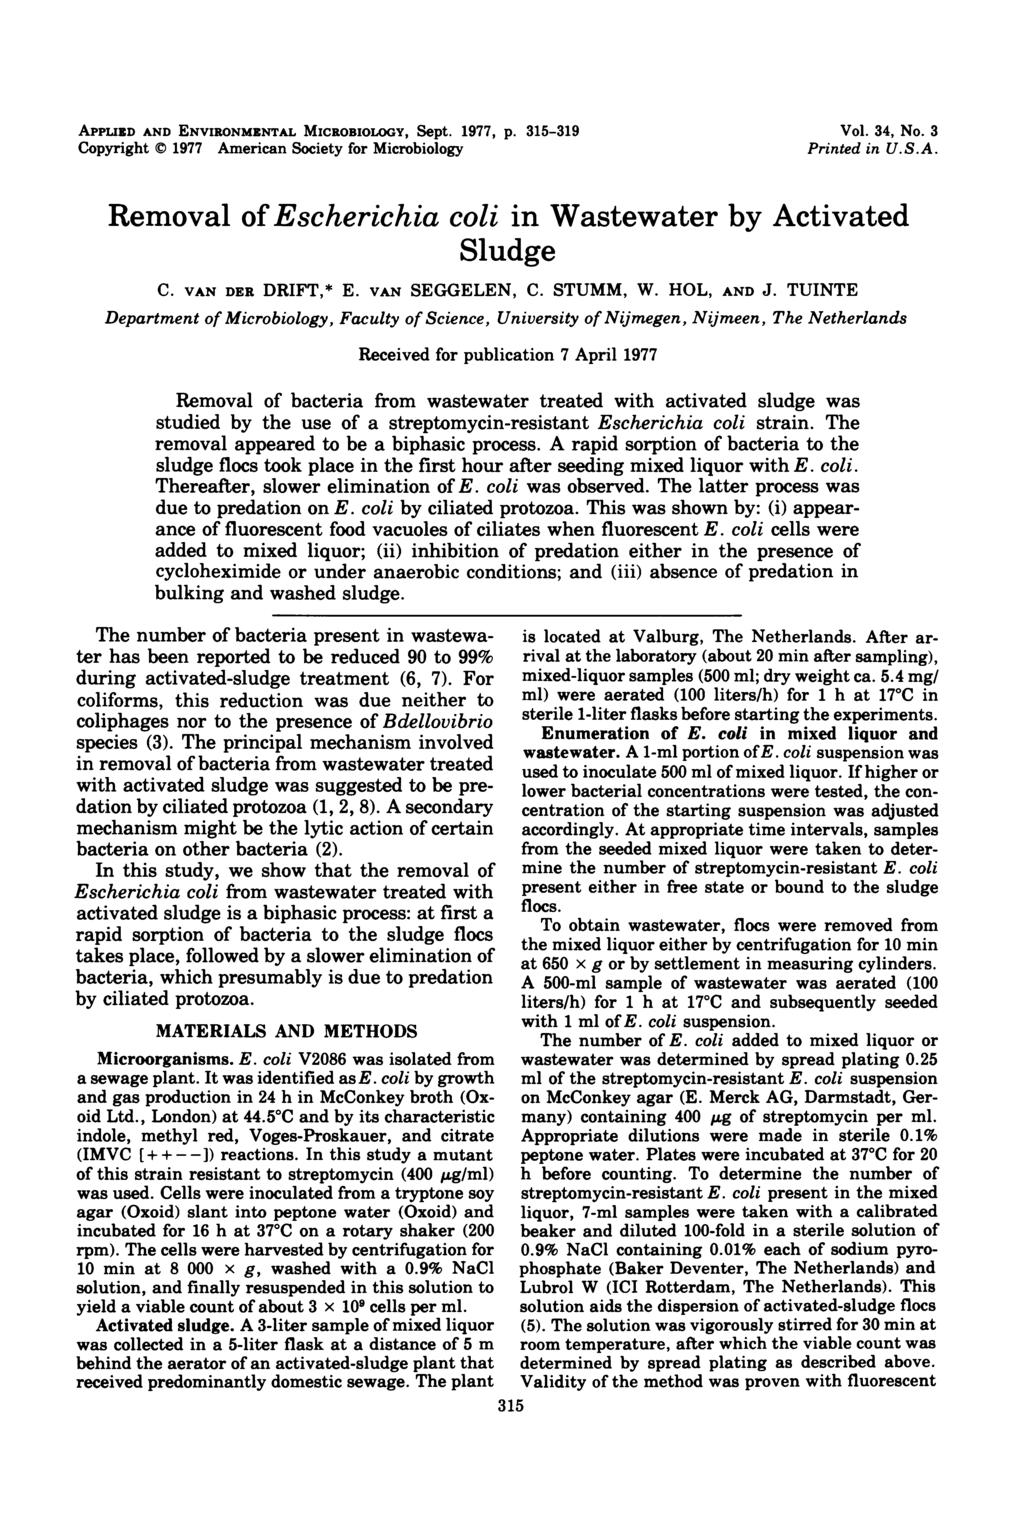 APPLIED AND ENVIRONMENTAL MICROBIOLOGY, Sept. 1977, p. 315-319 Copyright C 1977 American Society for Microbiology Vol. 34, No. 3 Printed in U.S.A. Removal of Escherichia coli in Wastewater by Activated Sludge C.